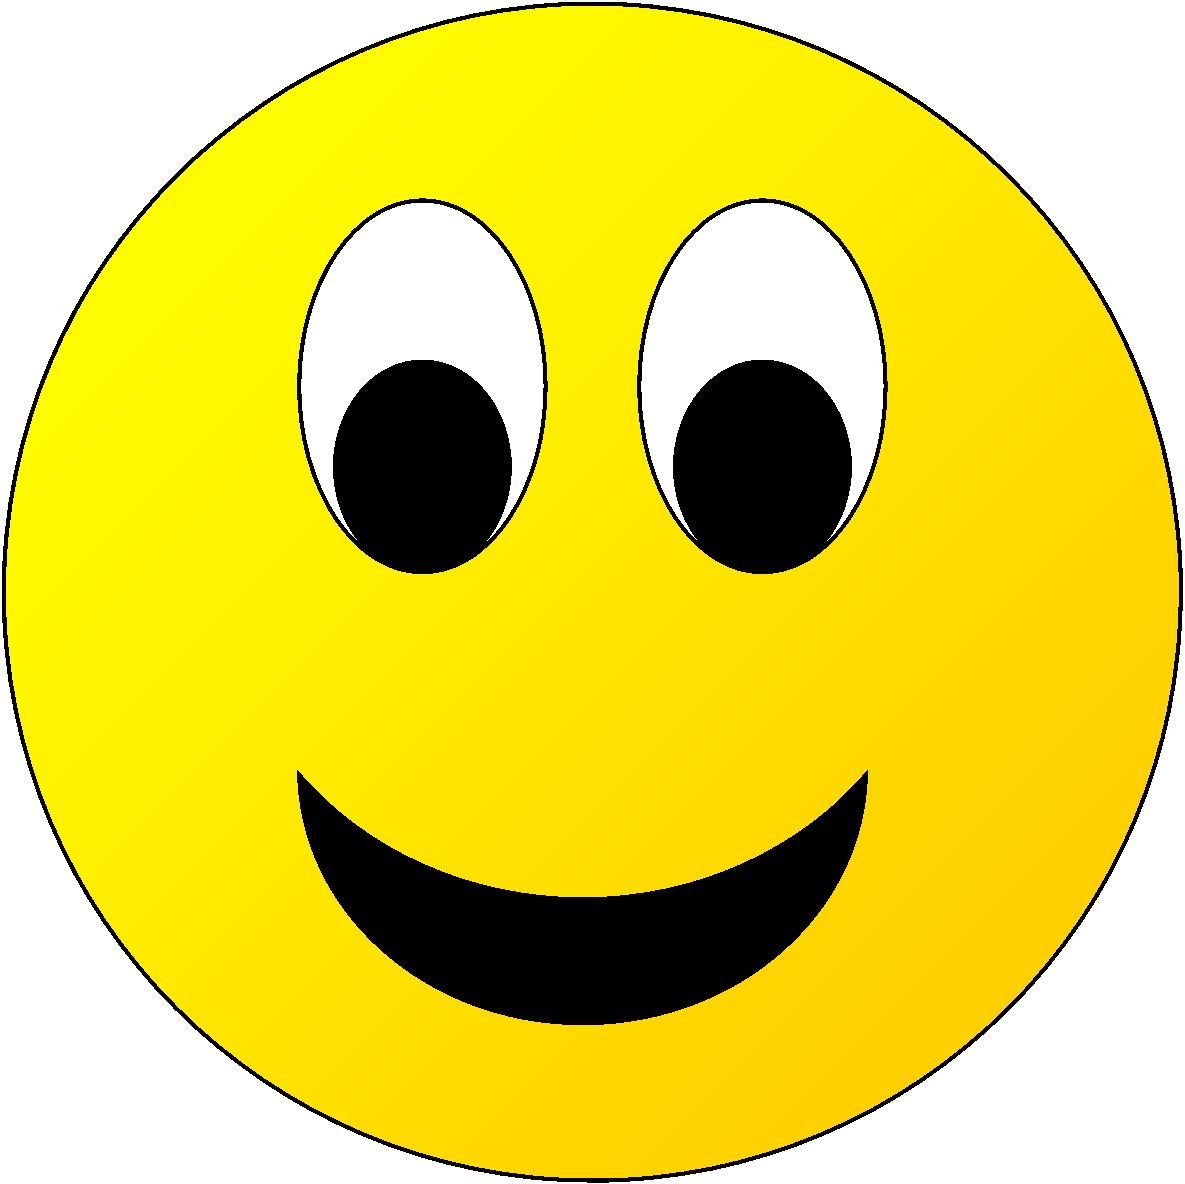 Free Smiley Face, Download Free Clip Art, Free Clip Art on